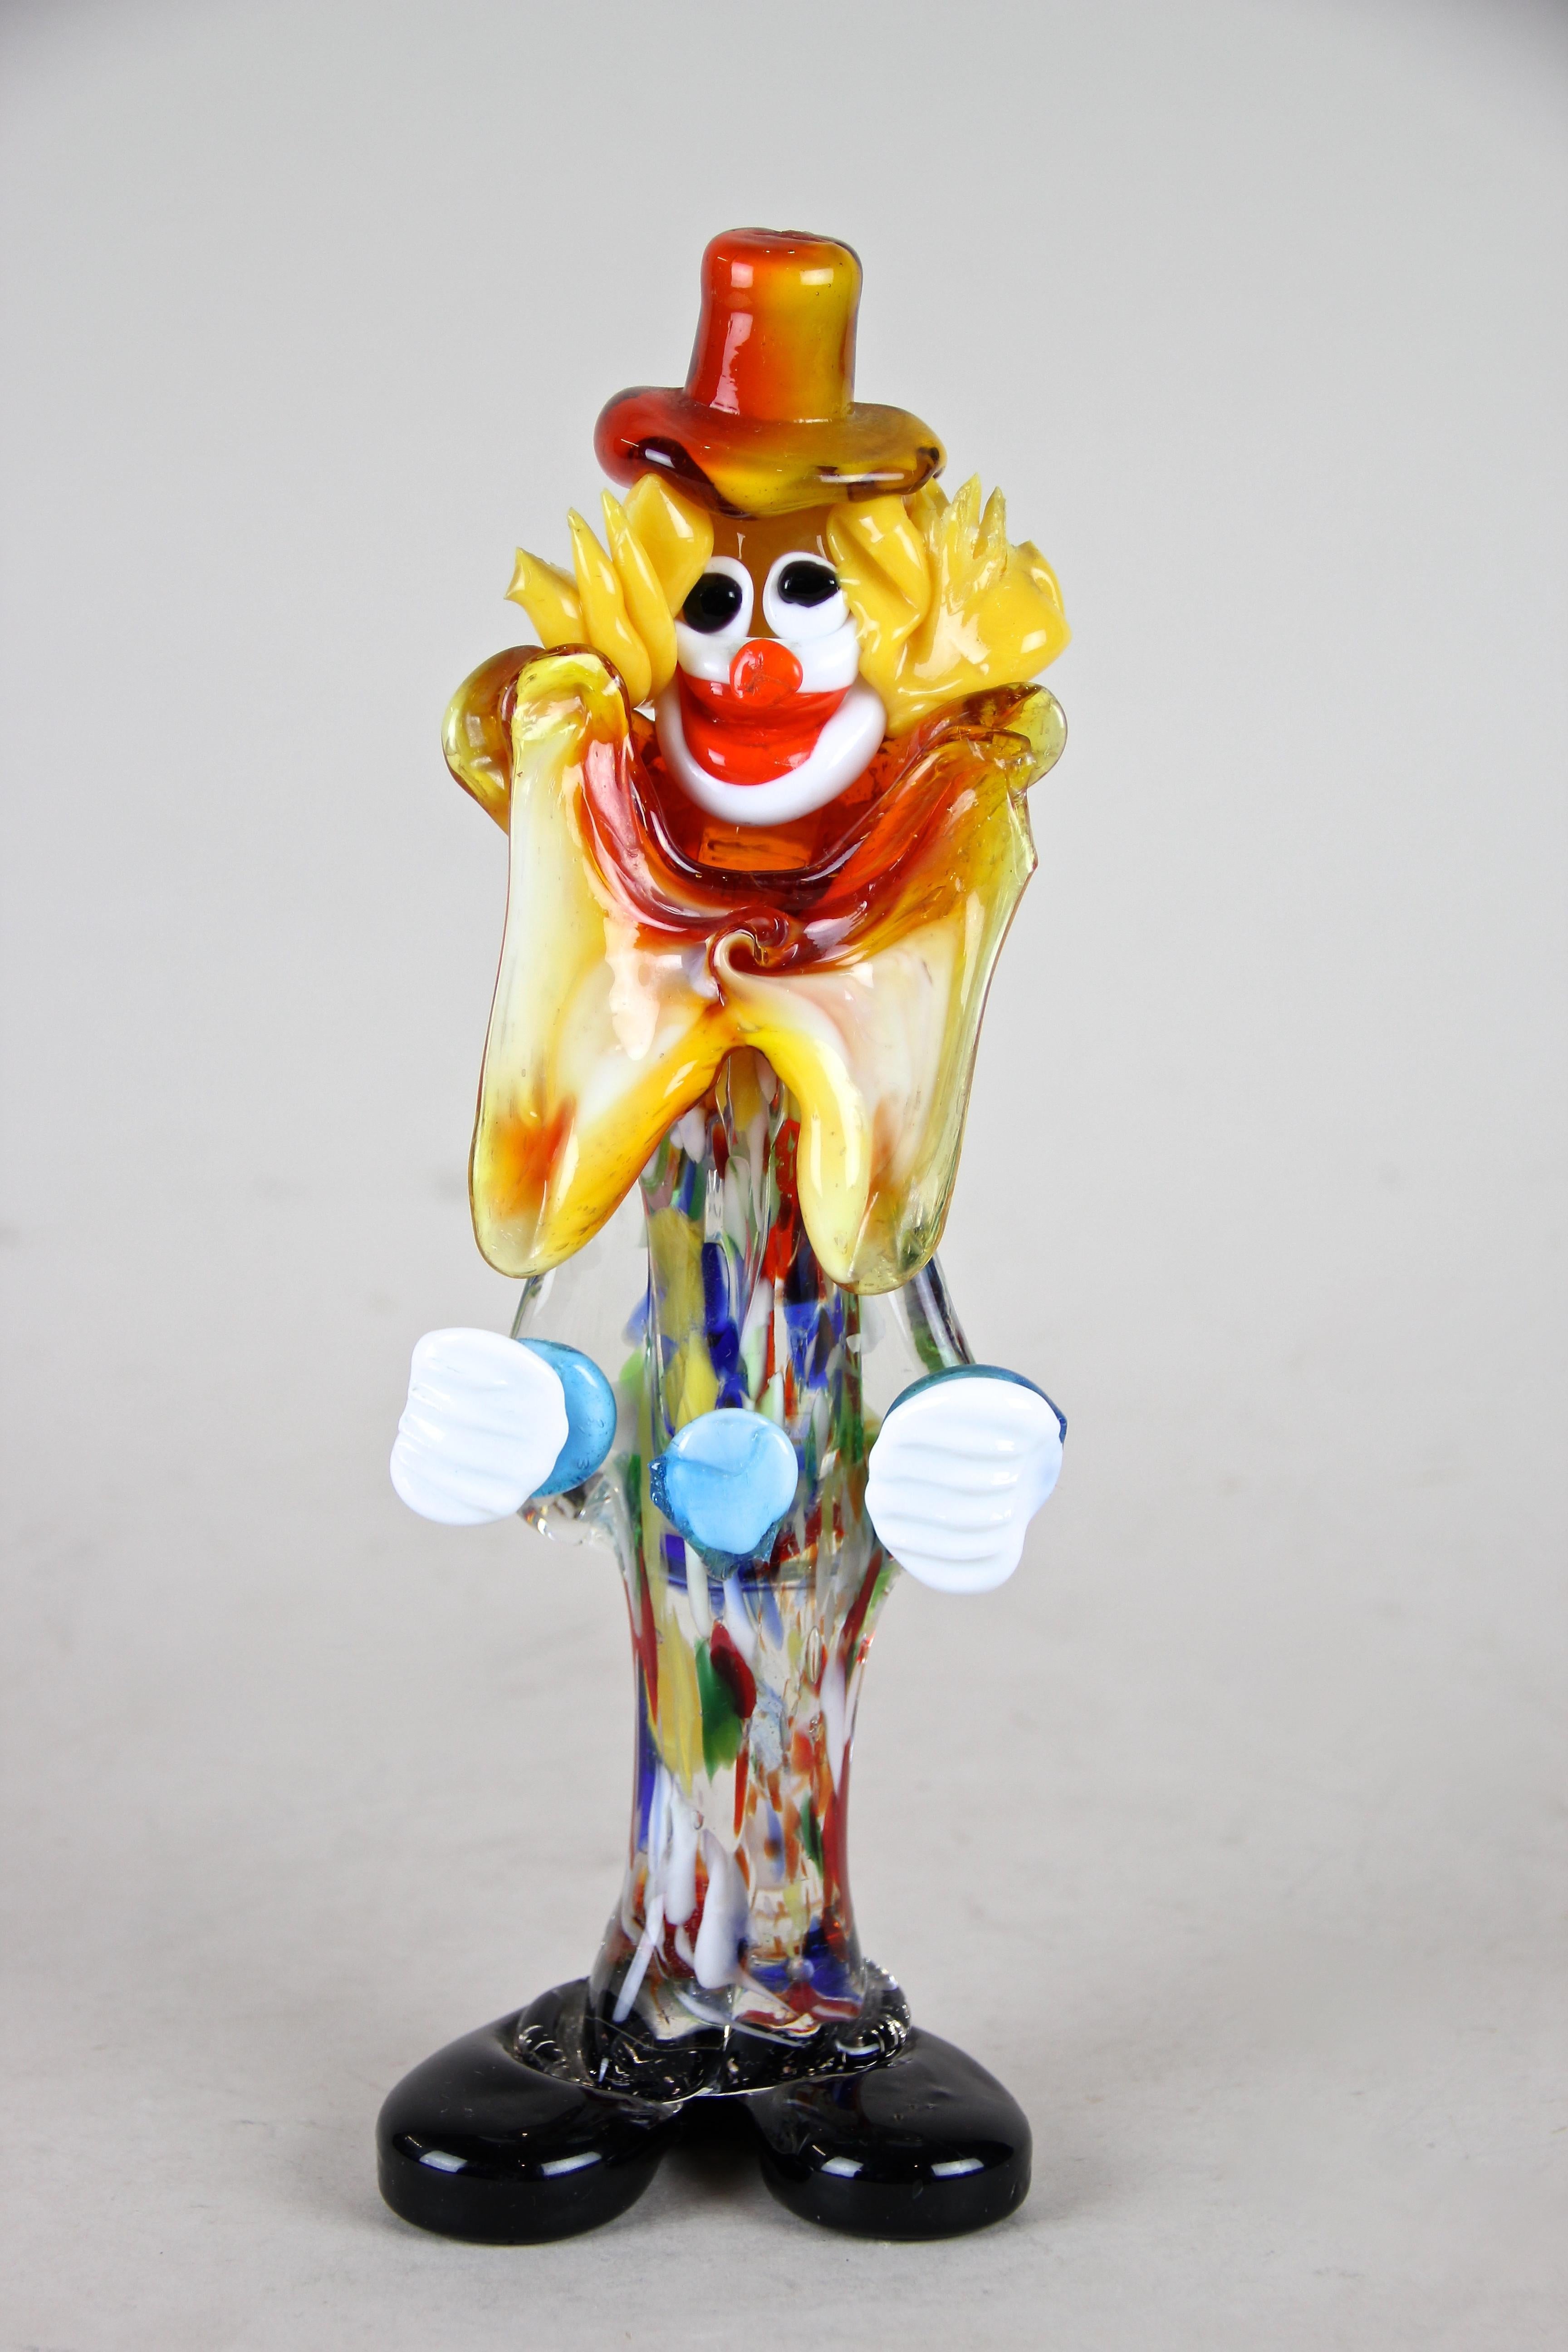 Great Murano glass clown from the midcentury circa 1950 in Italy. Murano glass lovers will love this piece: big black shoes, a multicolored glass body, a funny face with crazy yellow hair, a supersized bow tie and a red hat. Made with lots of love